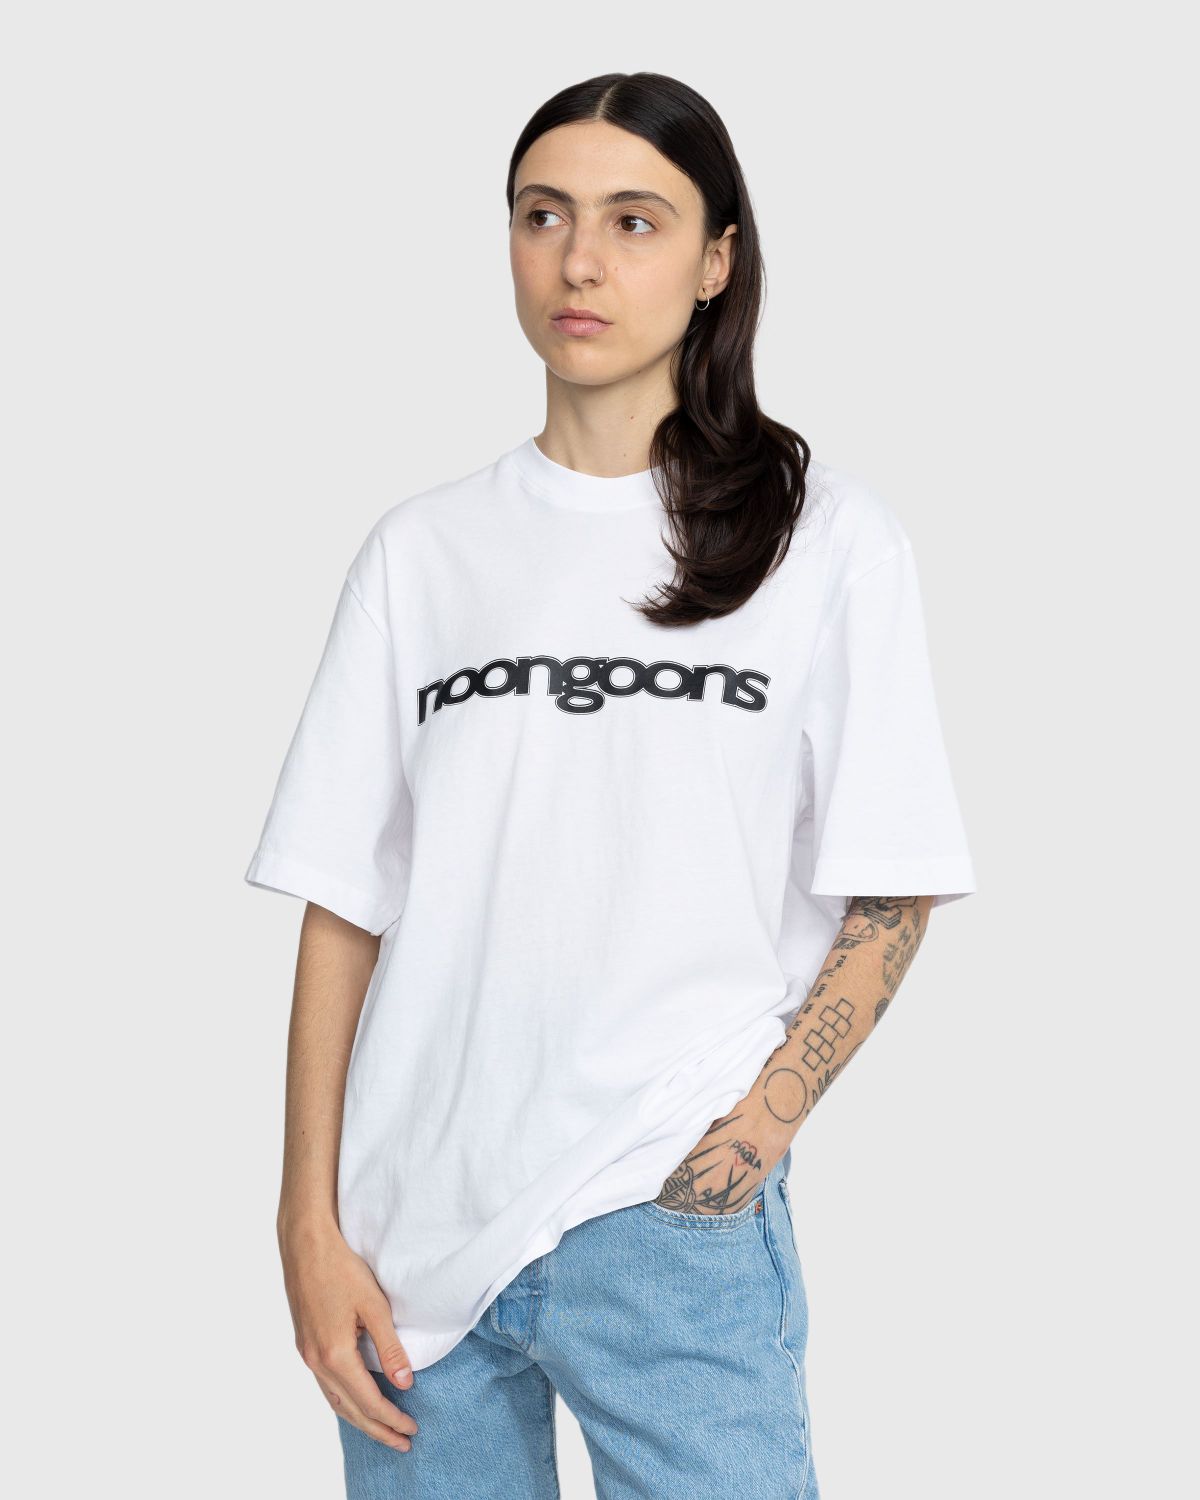 Noon Goons – Very Simple T-Shirt White | Highsnobiety Shop